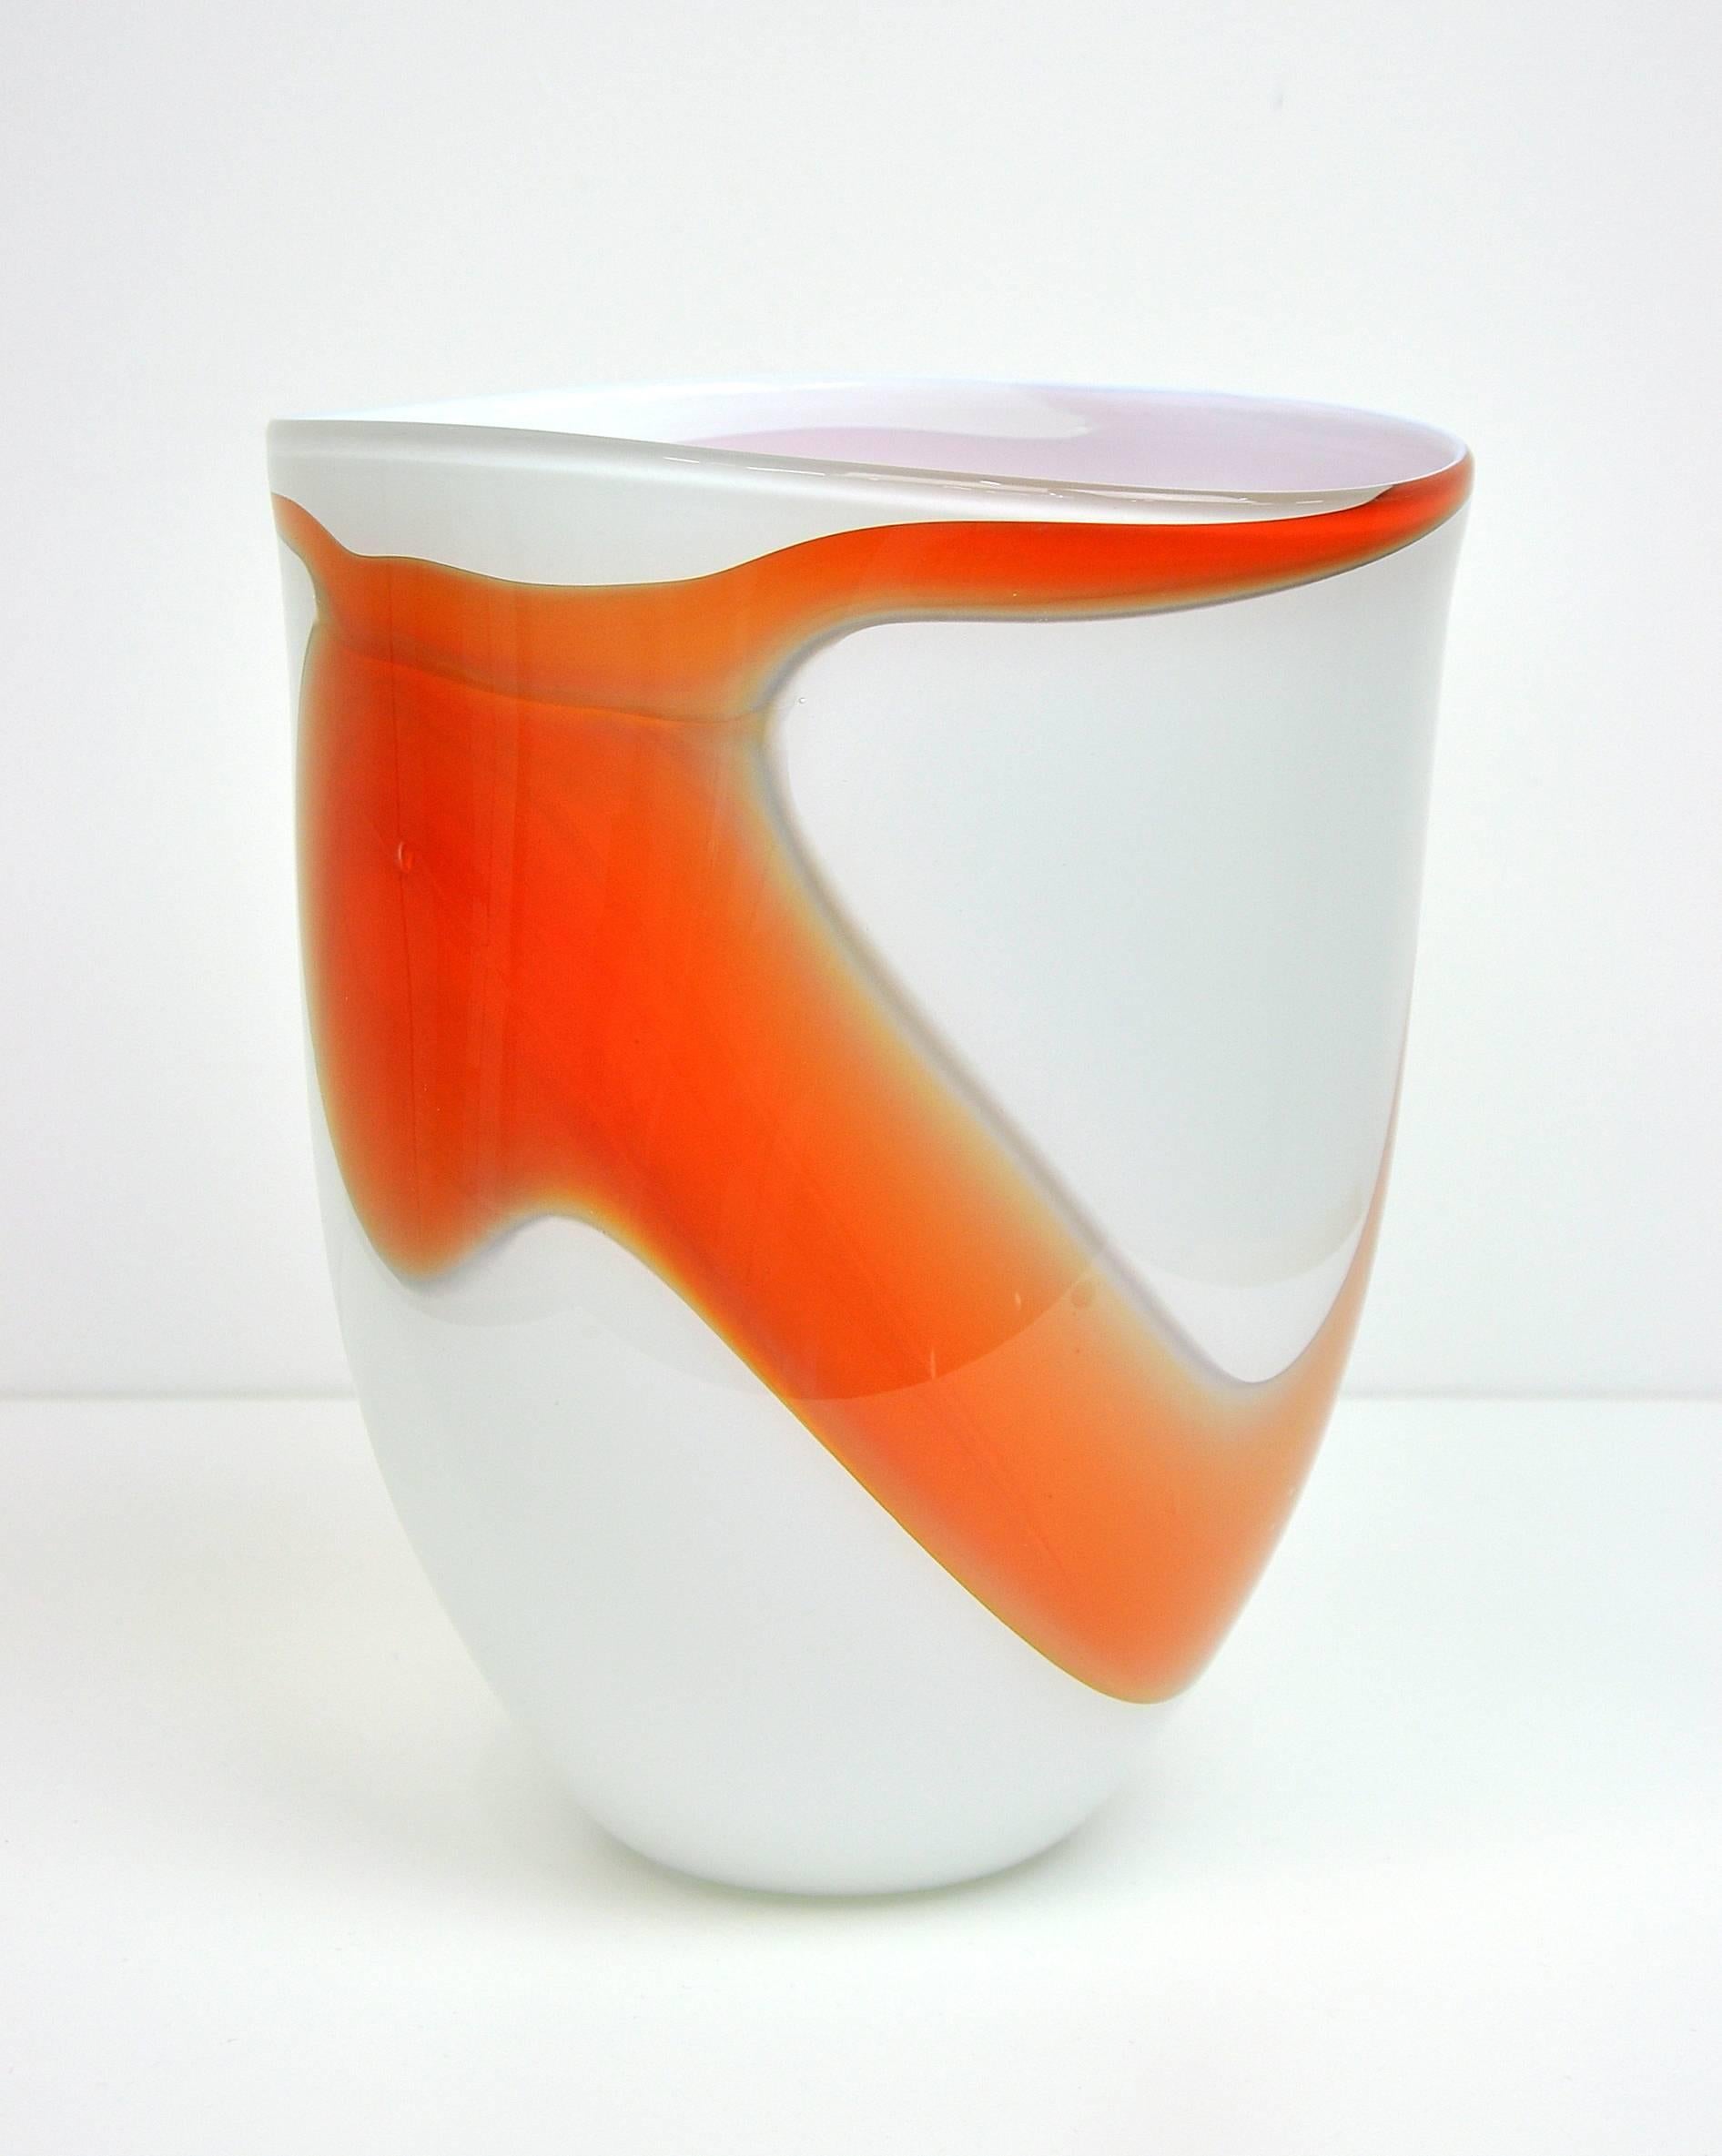 An early handblown glass vase by American artist Martin Blank (1962, WA). The blown glass vessel features a flattened bell shape decorated with vivid tangerine orange fluid-form decoration on an opaque, milky white background. Signed on